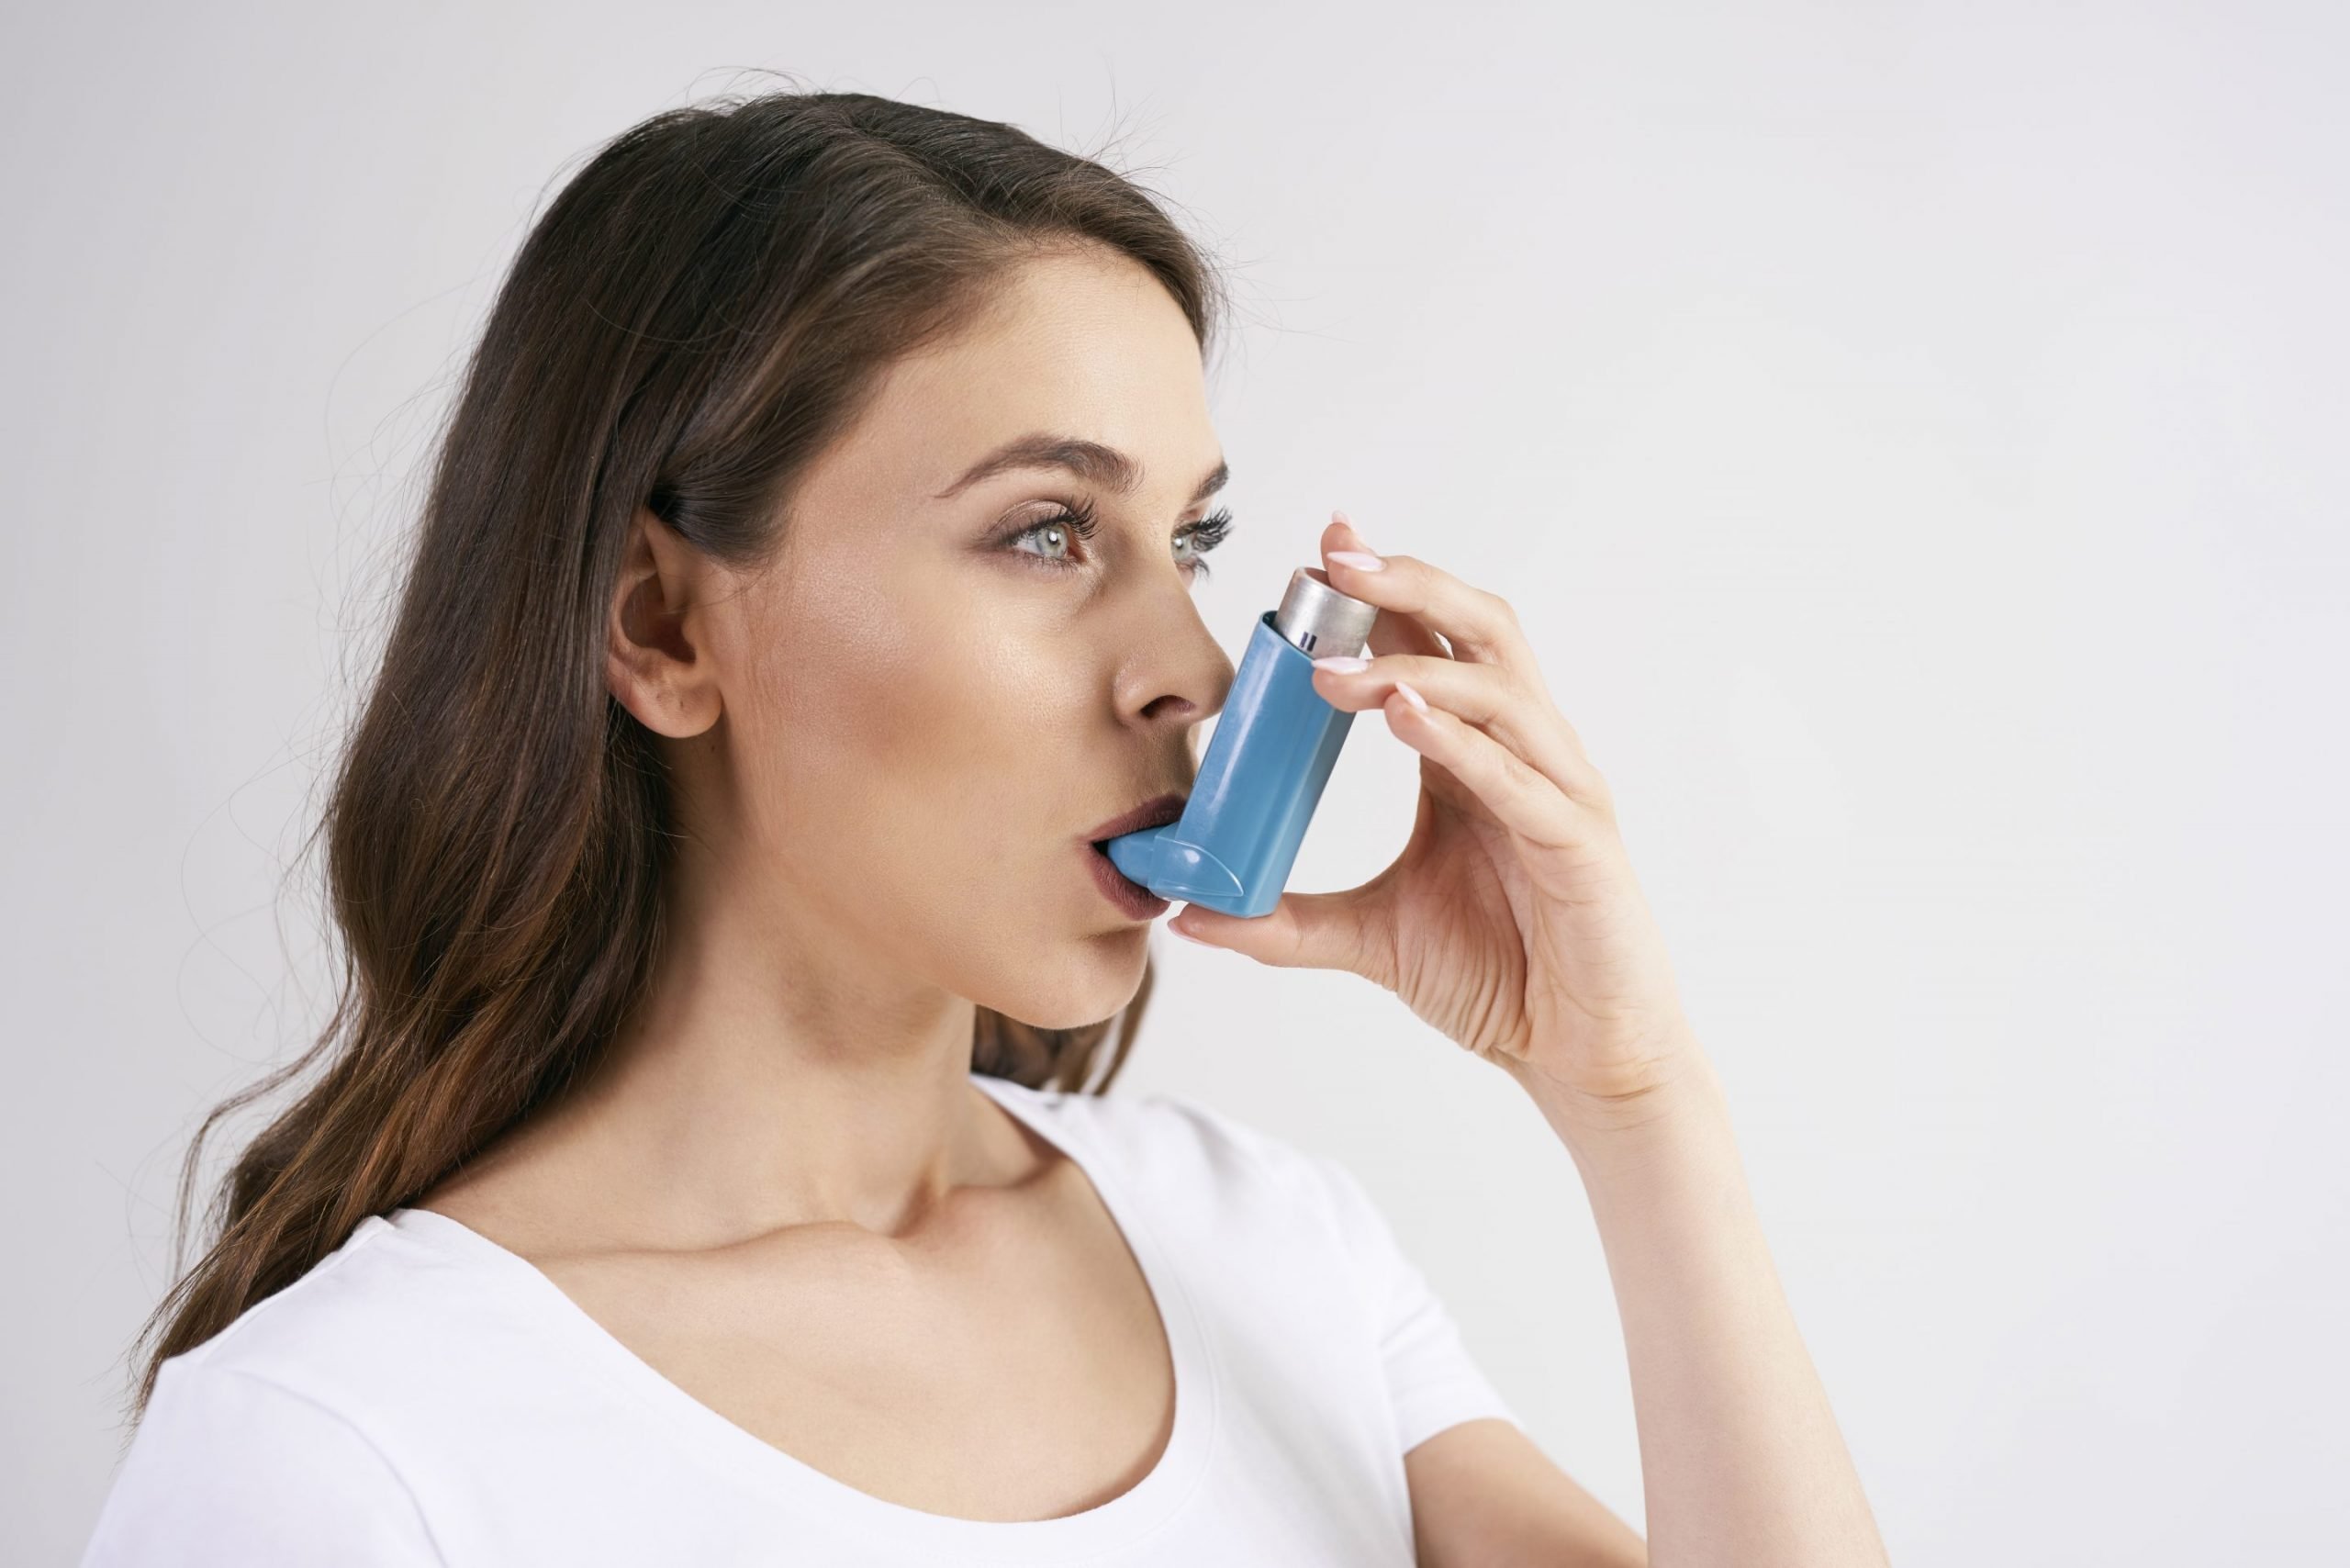 Treating Asthma Effectively In Direct Primary Care